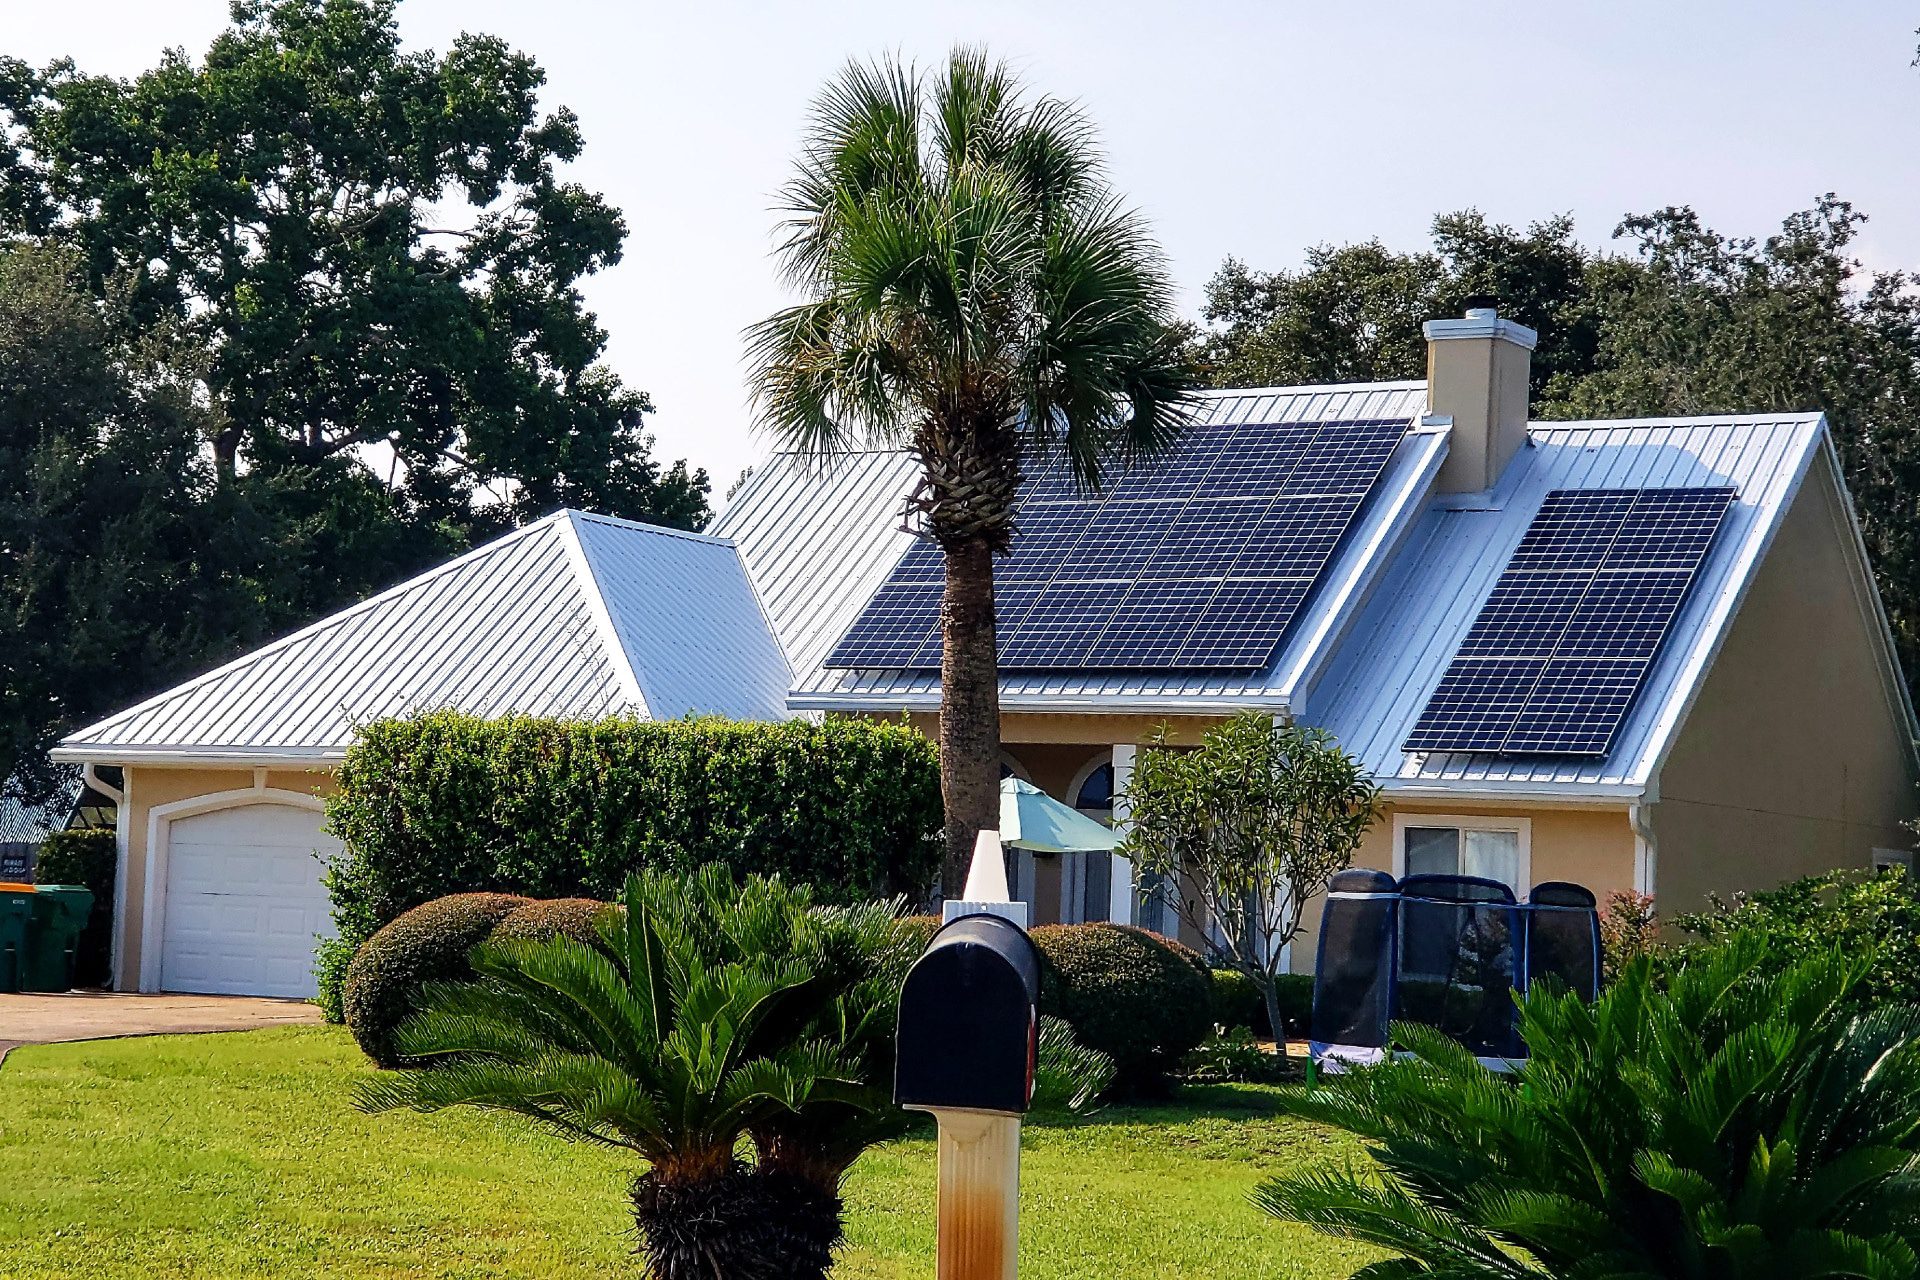 image of house with solar panels installed on roof